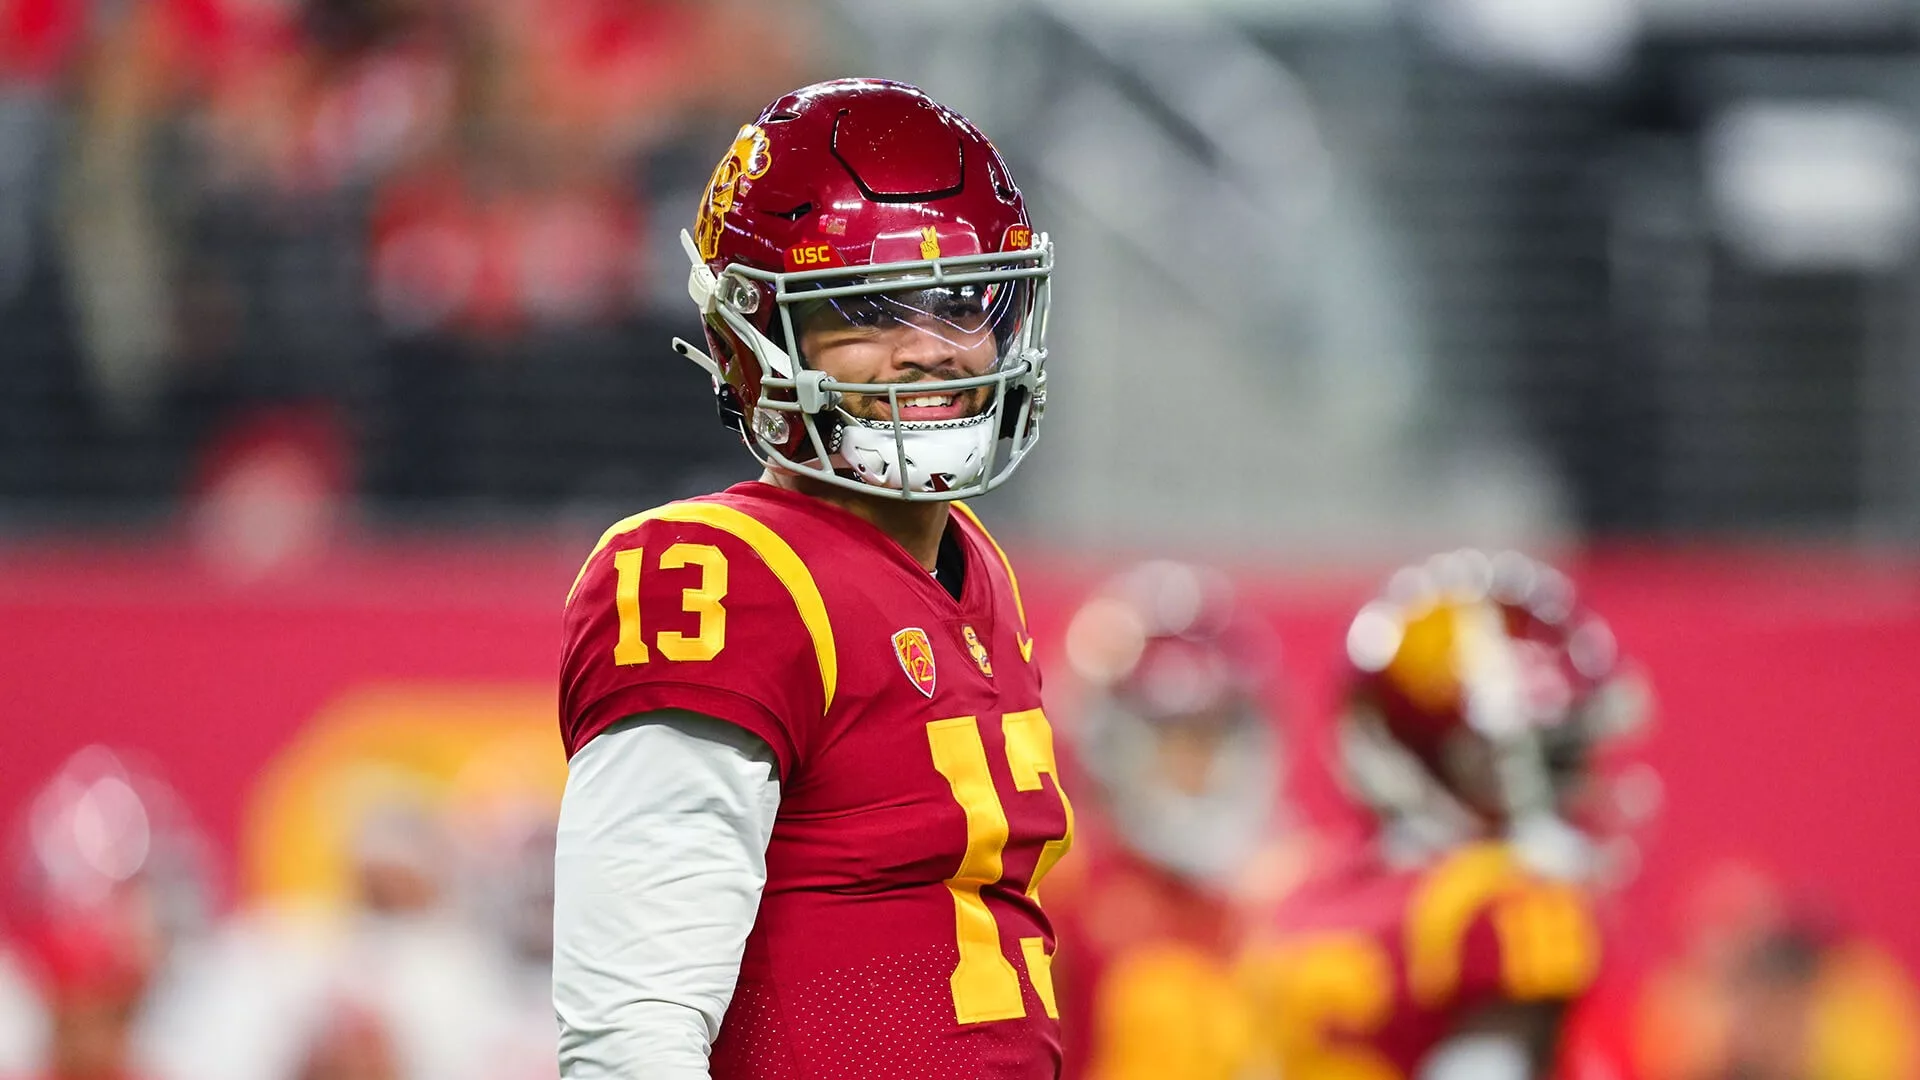 USC QB is silver lining for fans of stumbling NFL teams